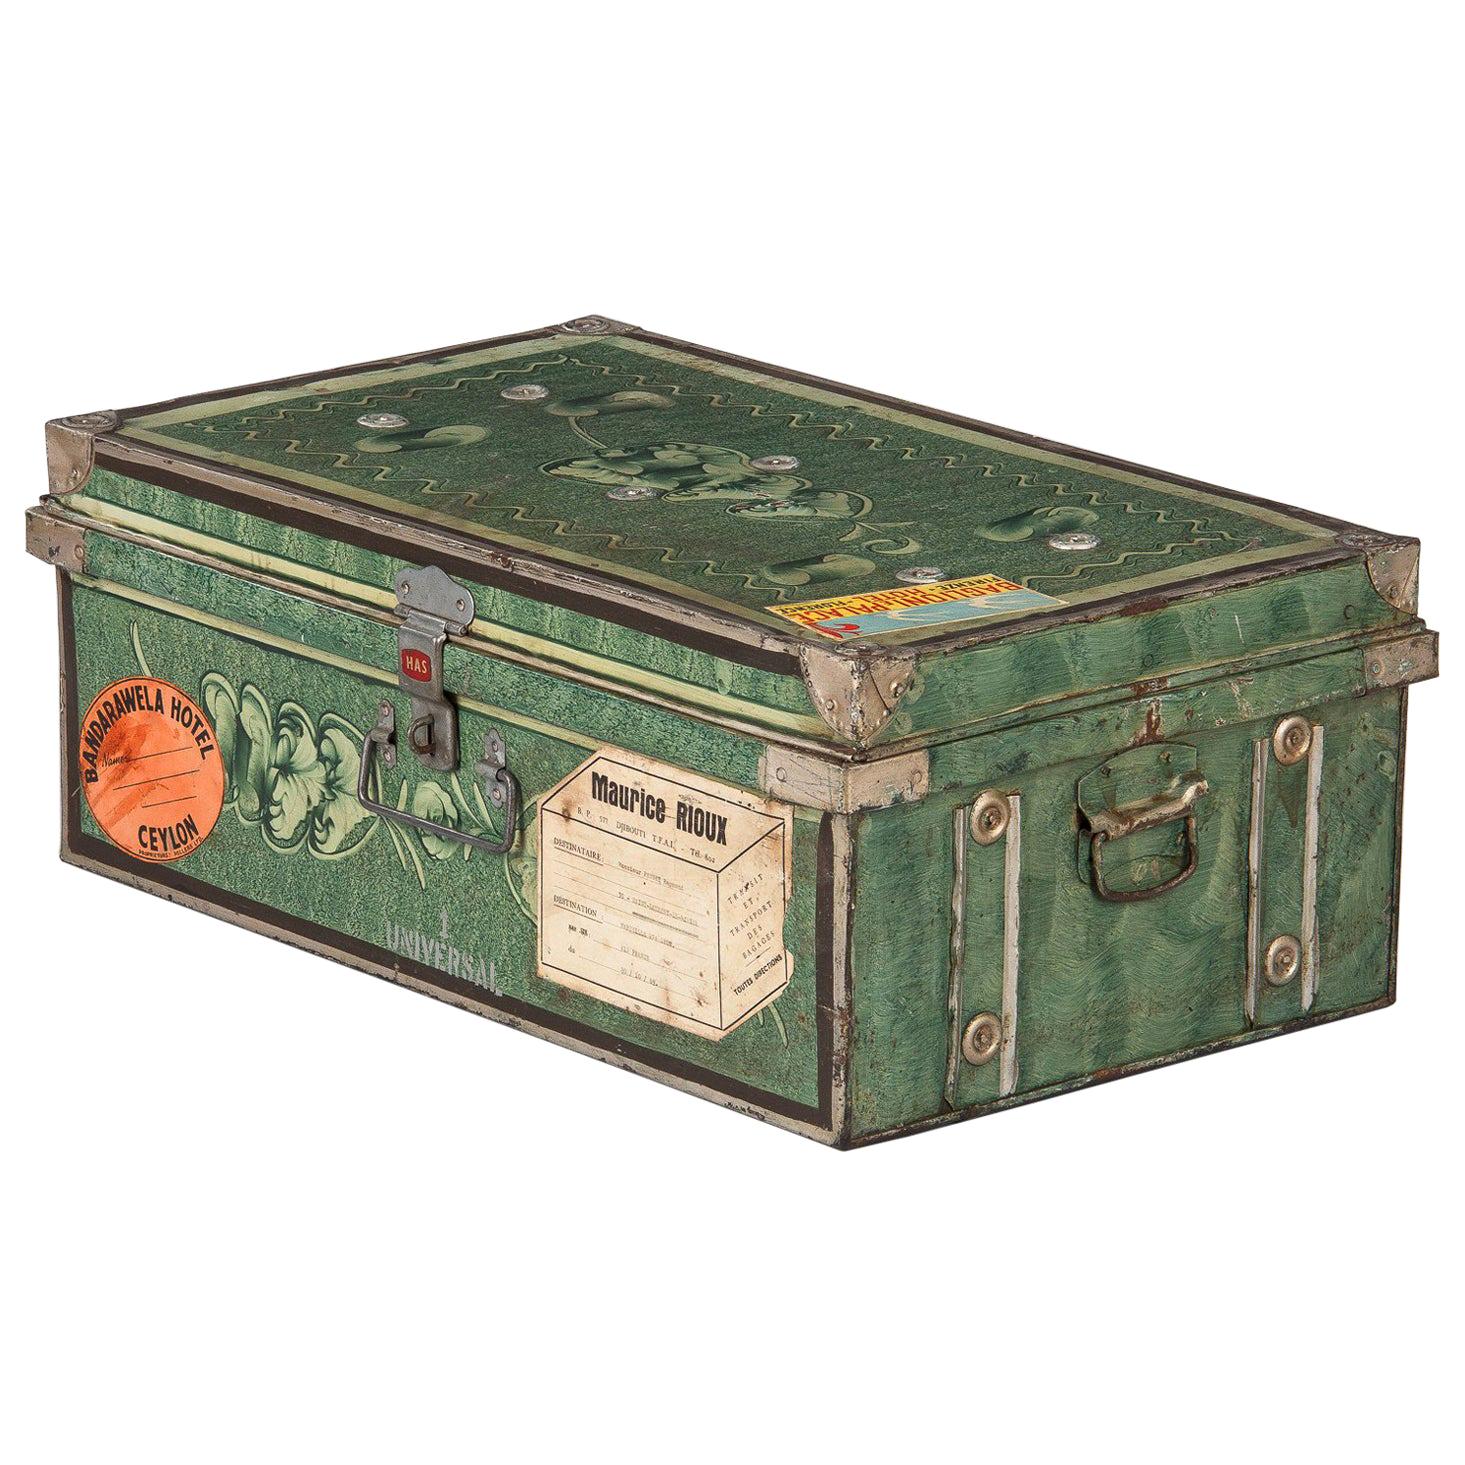 Painted Steel Steamer Trunk by Universal, India, 1950s